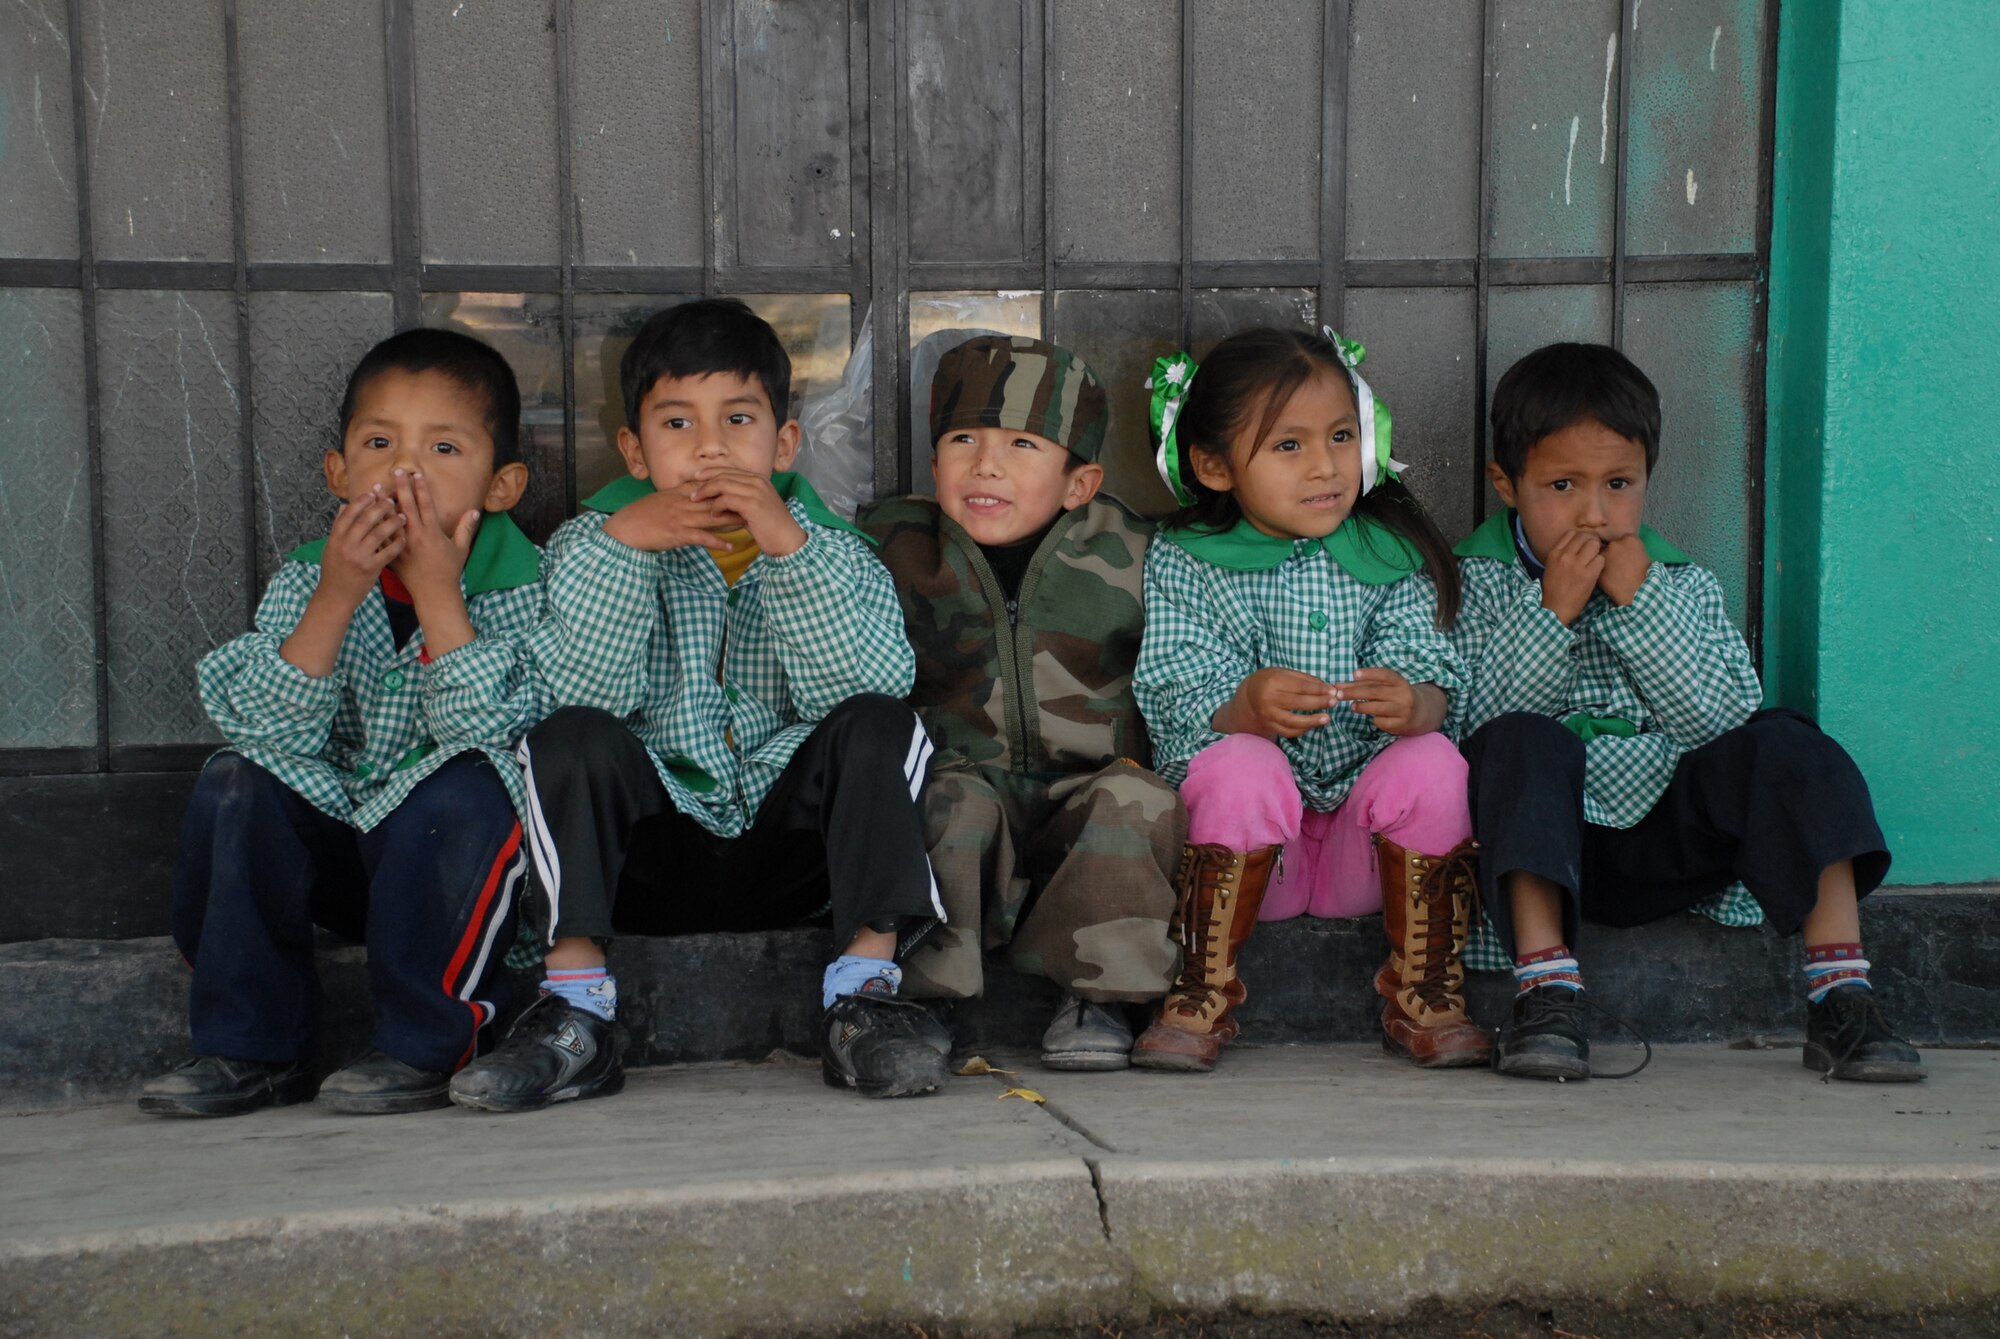 Peruvian children, from I.E. Inicial CRL. Miguel Peñarrieta Elementary School in Los Cabitos, Peru, eagerly await the beginning of recess after their tour of a U.S. CH-47 Chinook helicopter currently assigned to Task Force New Horizons. (U.S. Air Force photo/Airman 1st Class Tracie Forte)